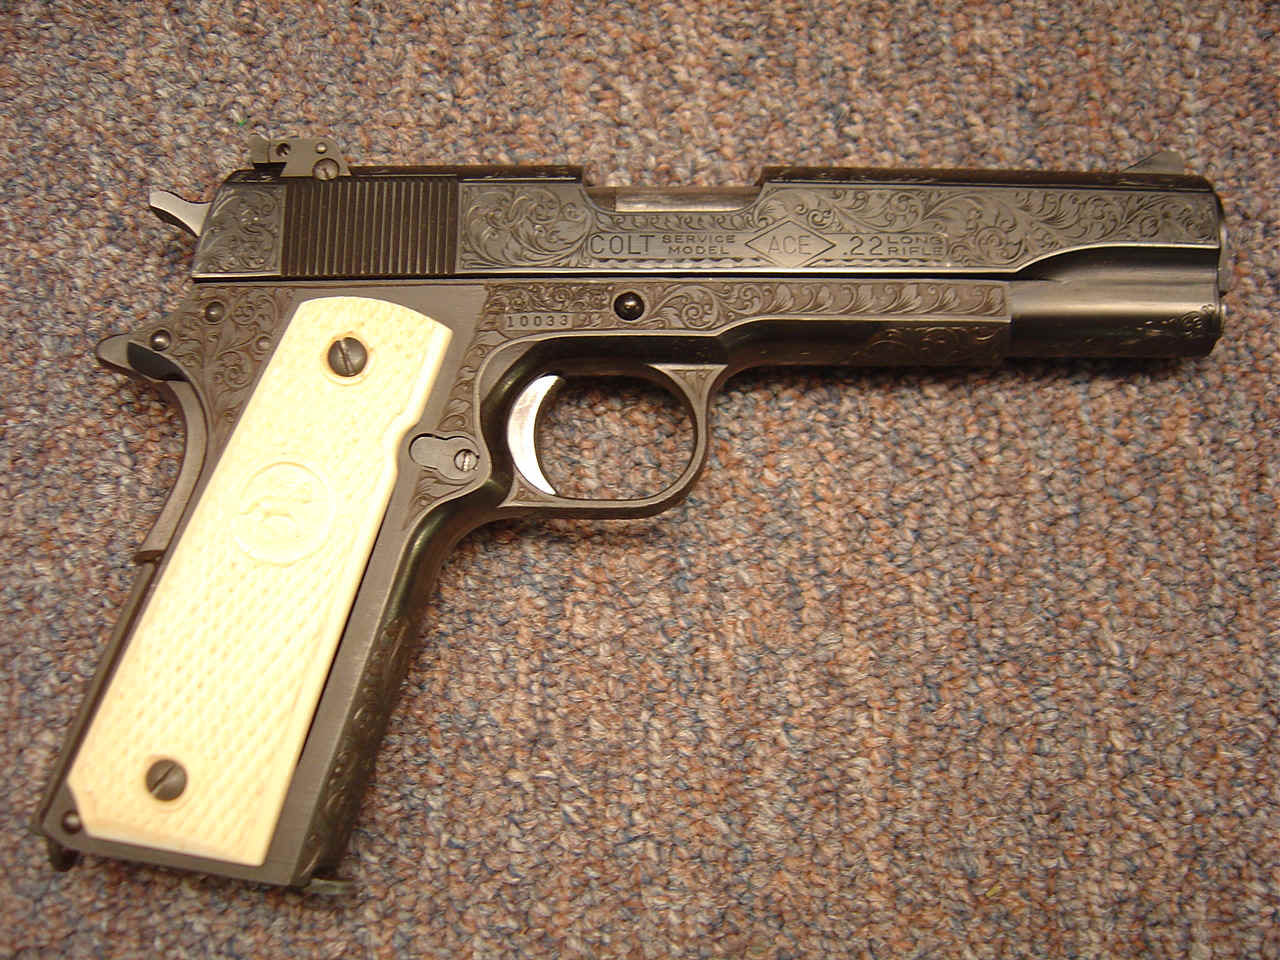 *Rare Profusely Engraved Colt Service Model Ace Semi-Auto Pistol, with Checkered Ivory Rampant Colt Grips